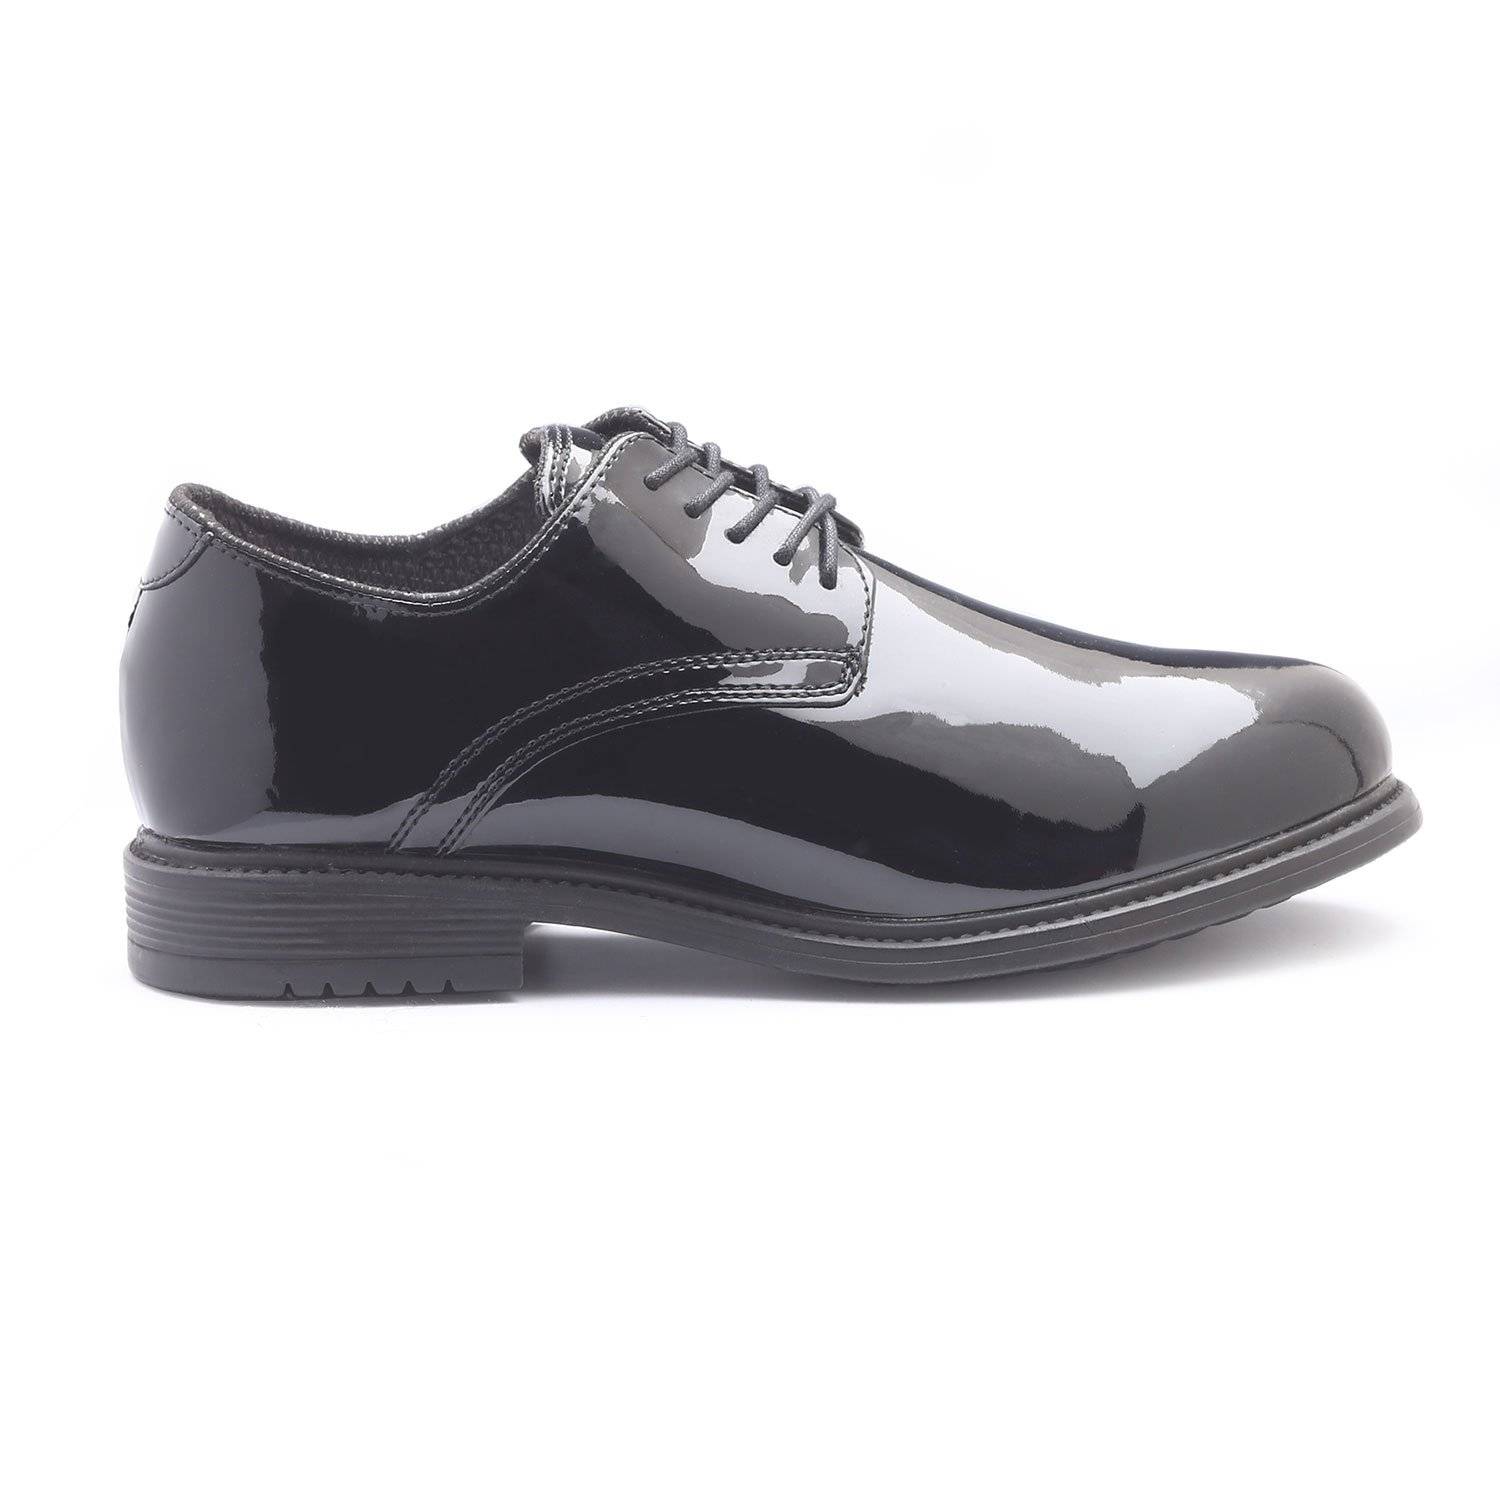 LawPro High Gloss Oxfords